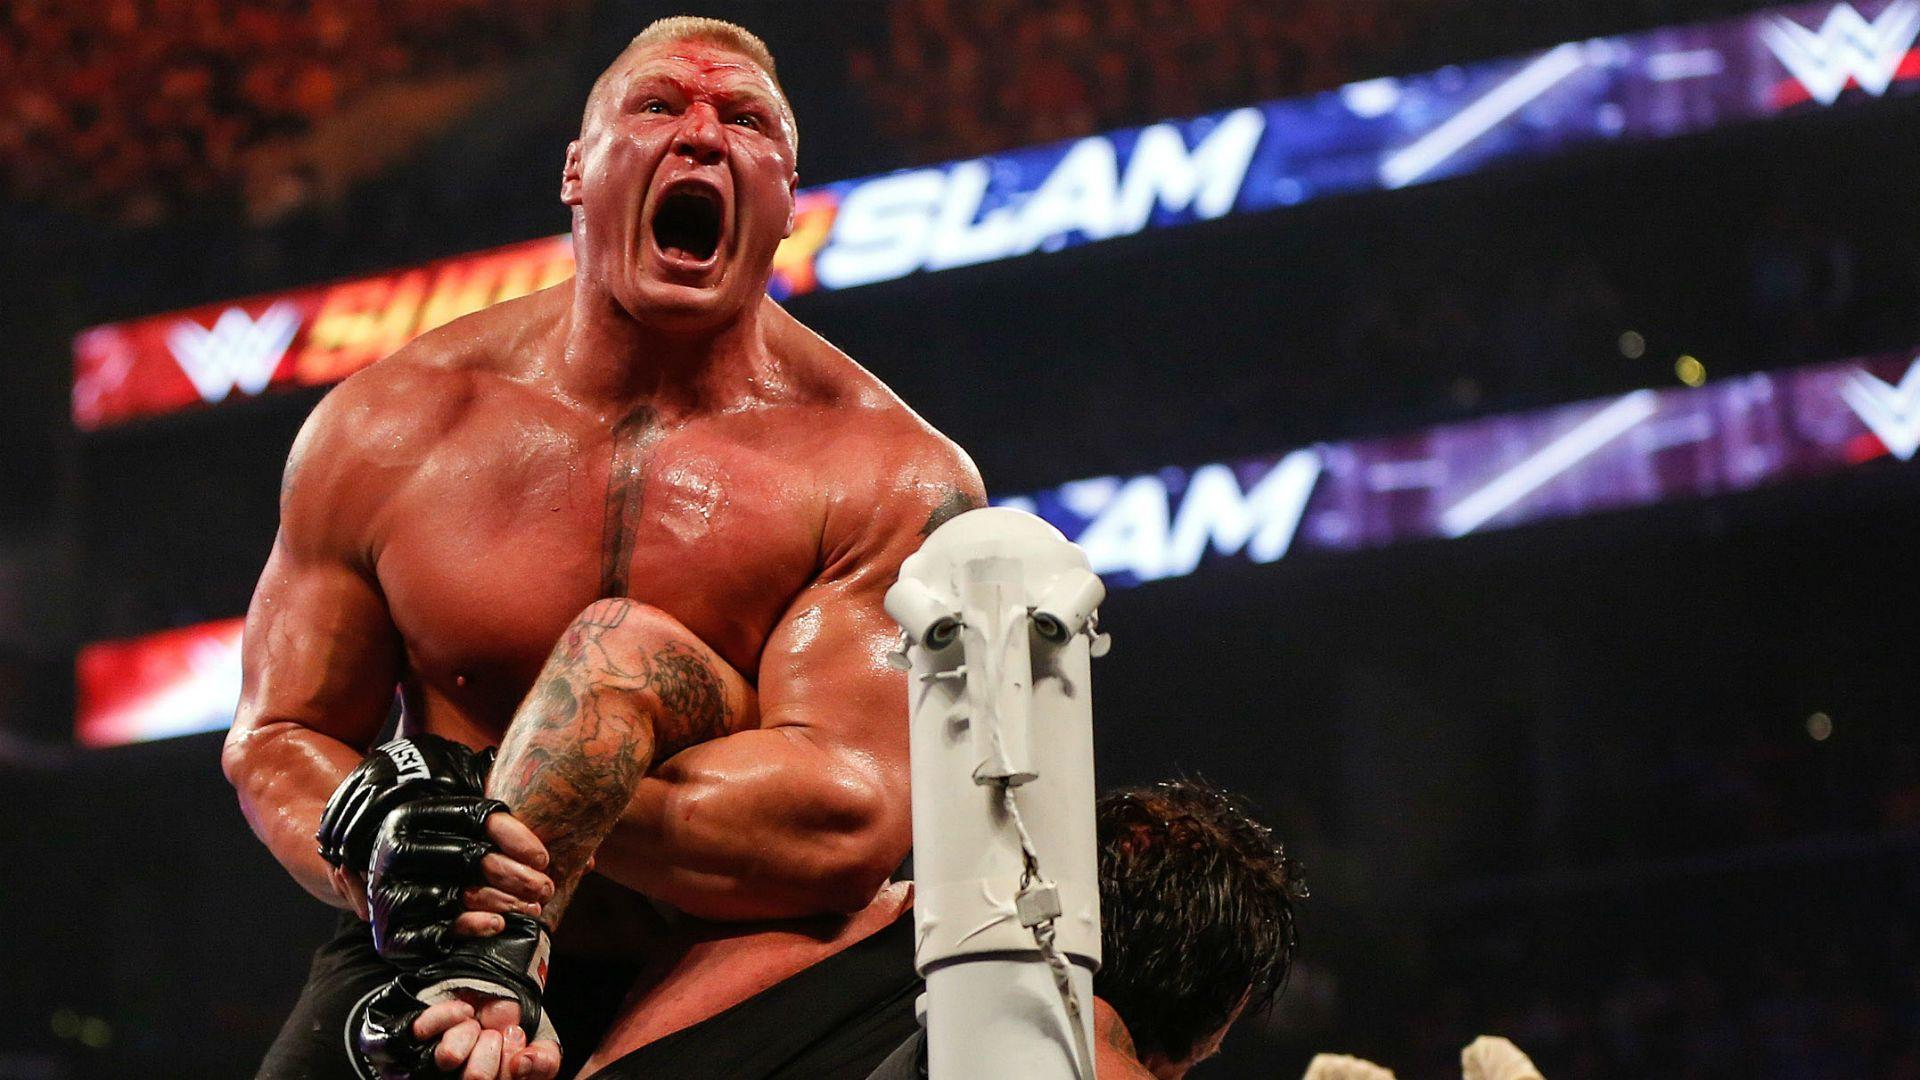 Paul Heyman: “Brock Lesnar Wants To Compete Inside Of The Octagon”